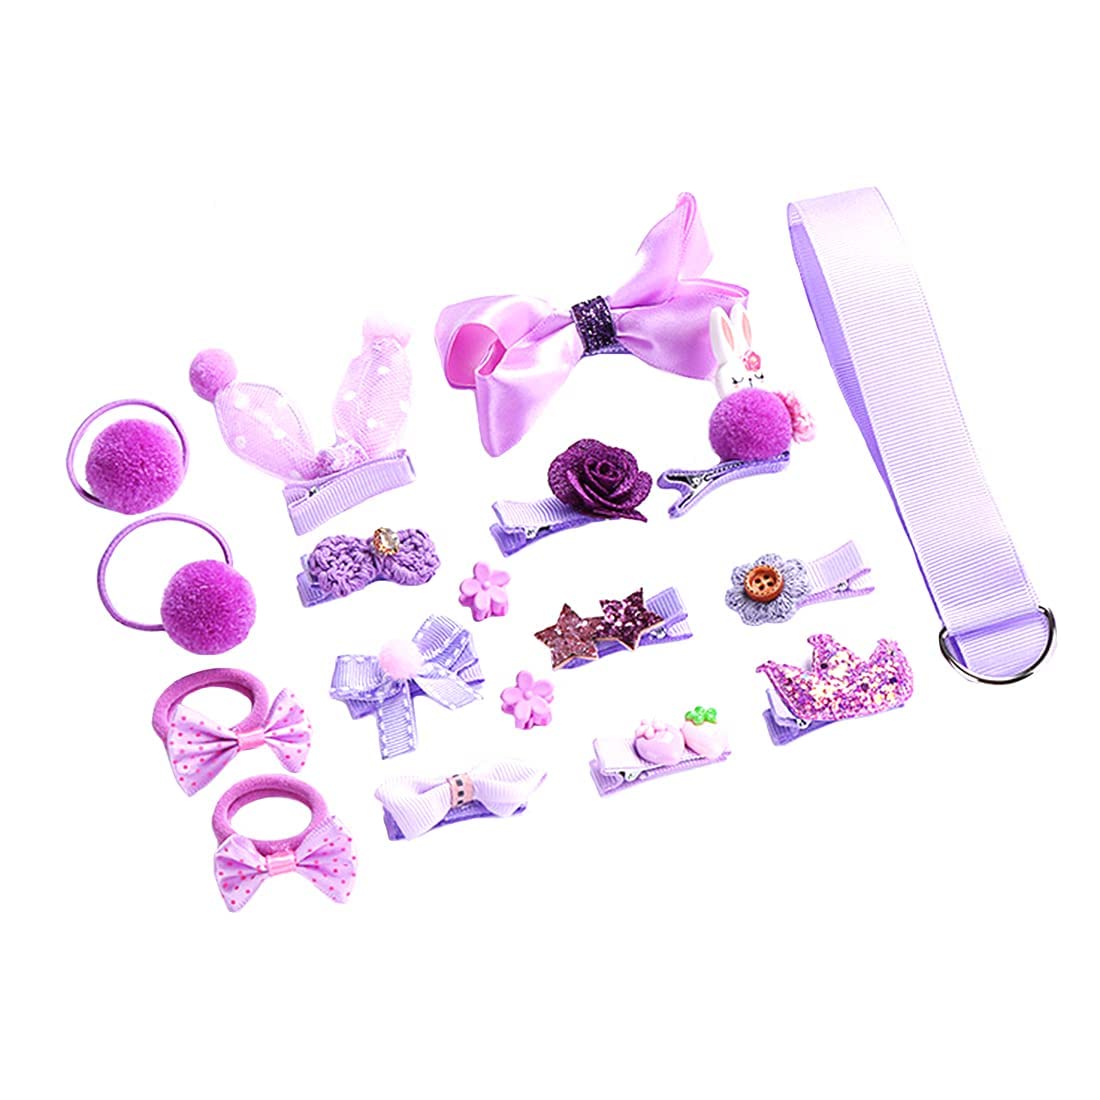 Melbees by Yellow Chimes Kids Hair Accessories for Girls Hair Accessories Combo Set Purple 18 Pcs Baby Girl's Hair Clips Set Cute Ponytail Holder Claw Clip Bow Clips For Girls Assortment Gift set for Kids Teens Toddlers